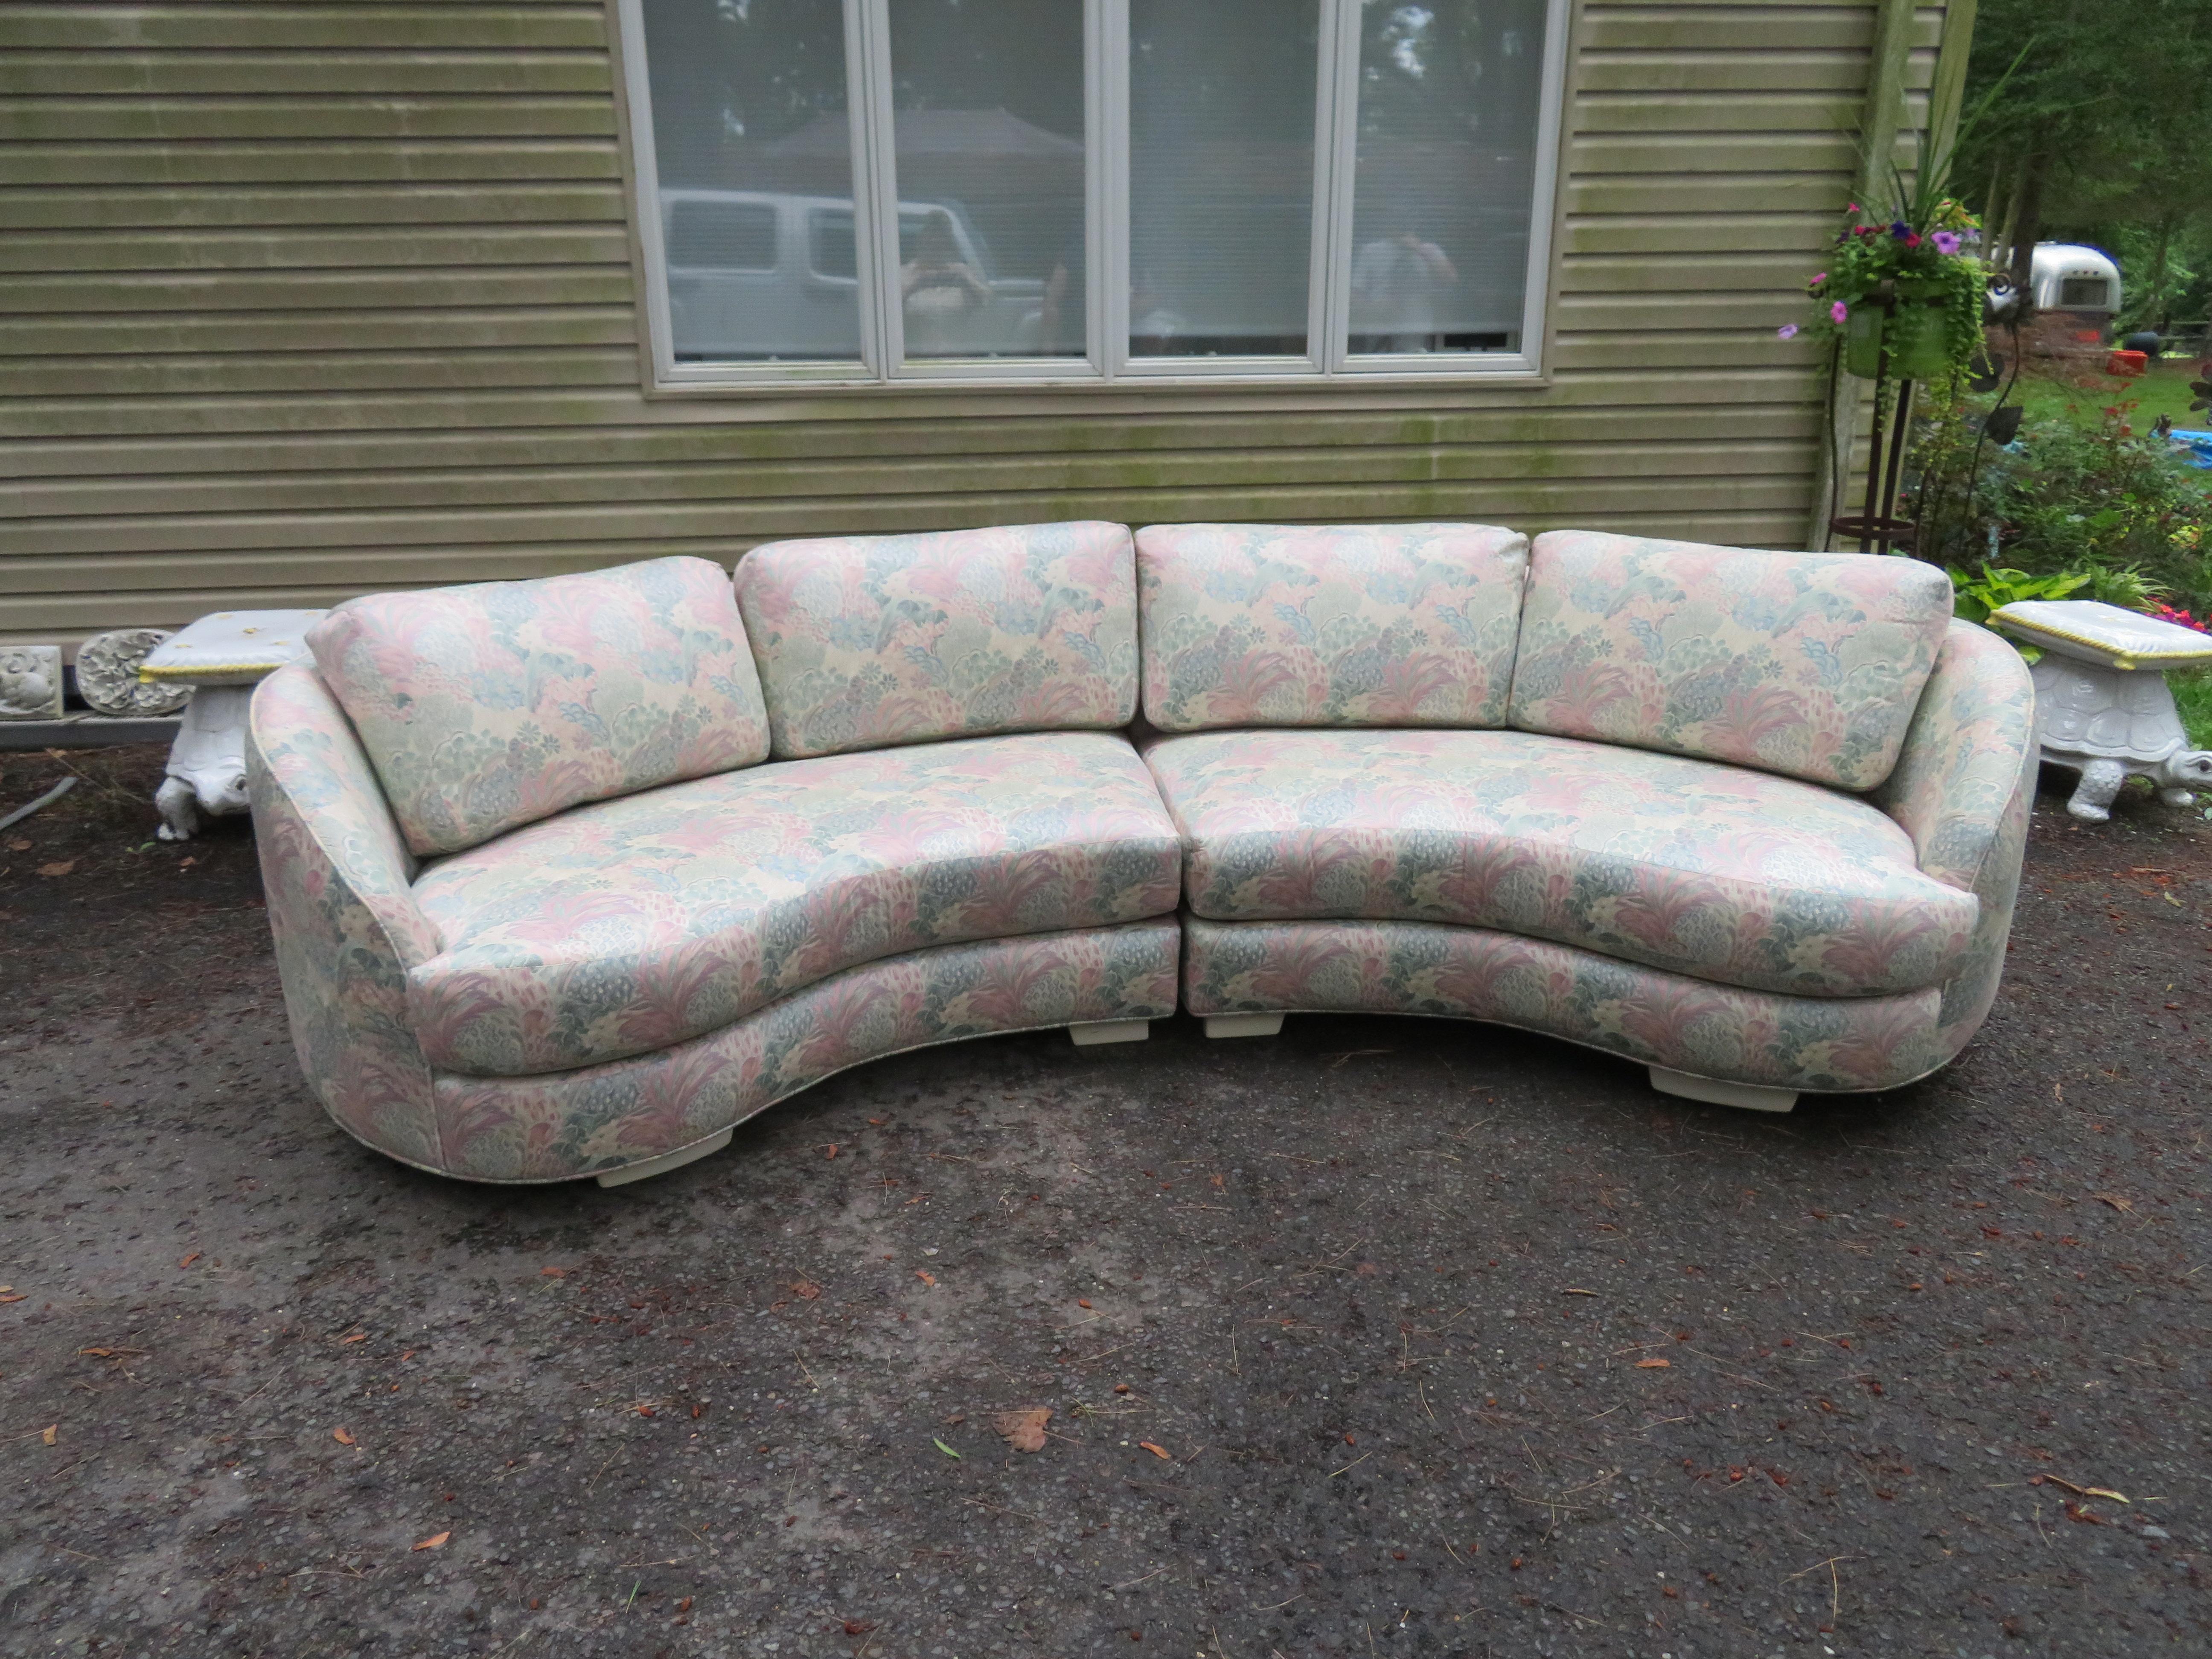 Stunning Milo Baughman Thayer Coggin curved cloud 2 piece sofa sectional. Nicely proportioned curved sofa with comfortable back cushions. This sectional retains it's original fabric which is dated and will need to be reupholstered- Thayer Coggin